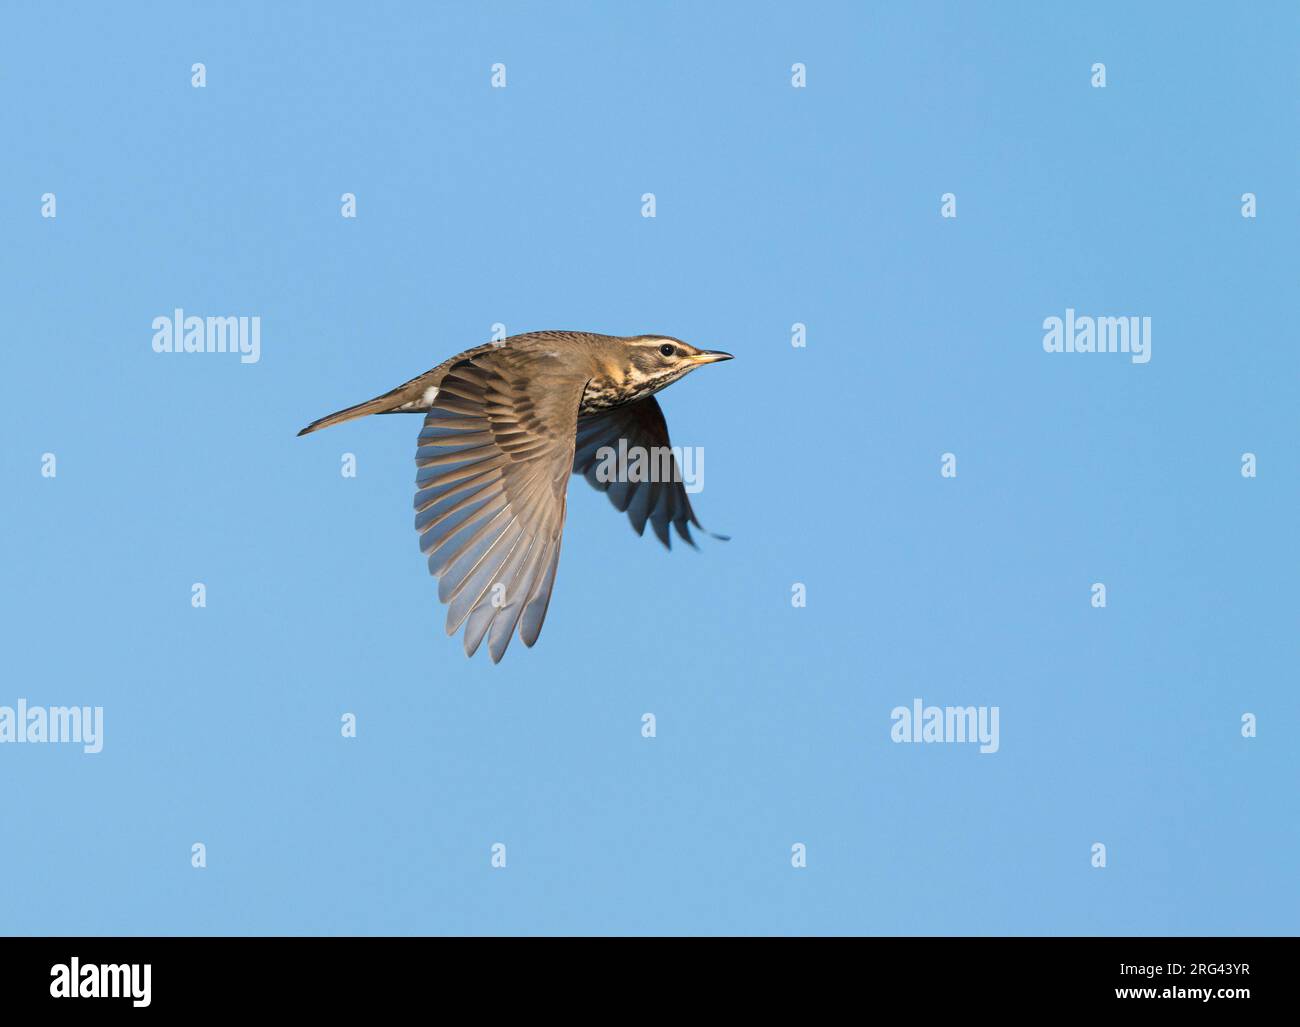 Flying, migrating Redwing (Turdus iliacus) in blue sky showing upperparts Stock Photo